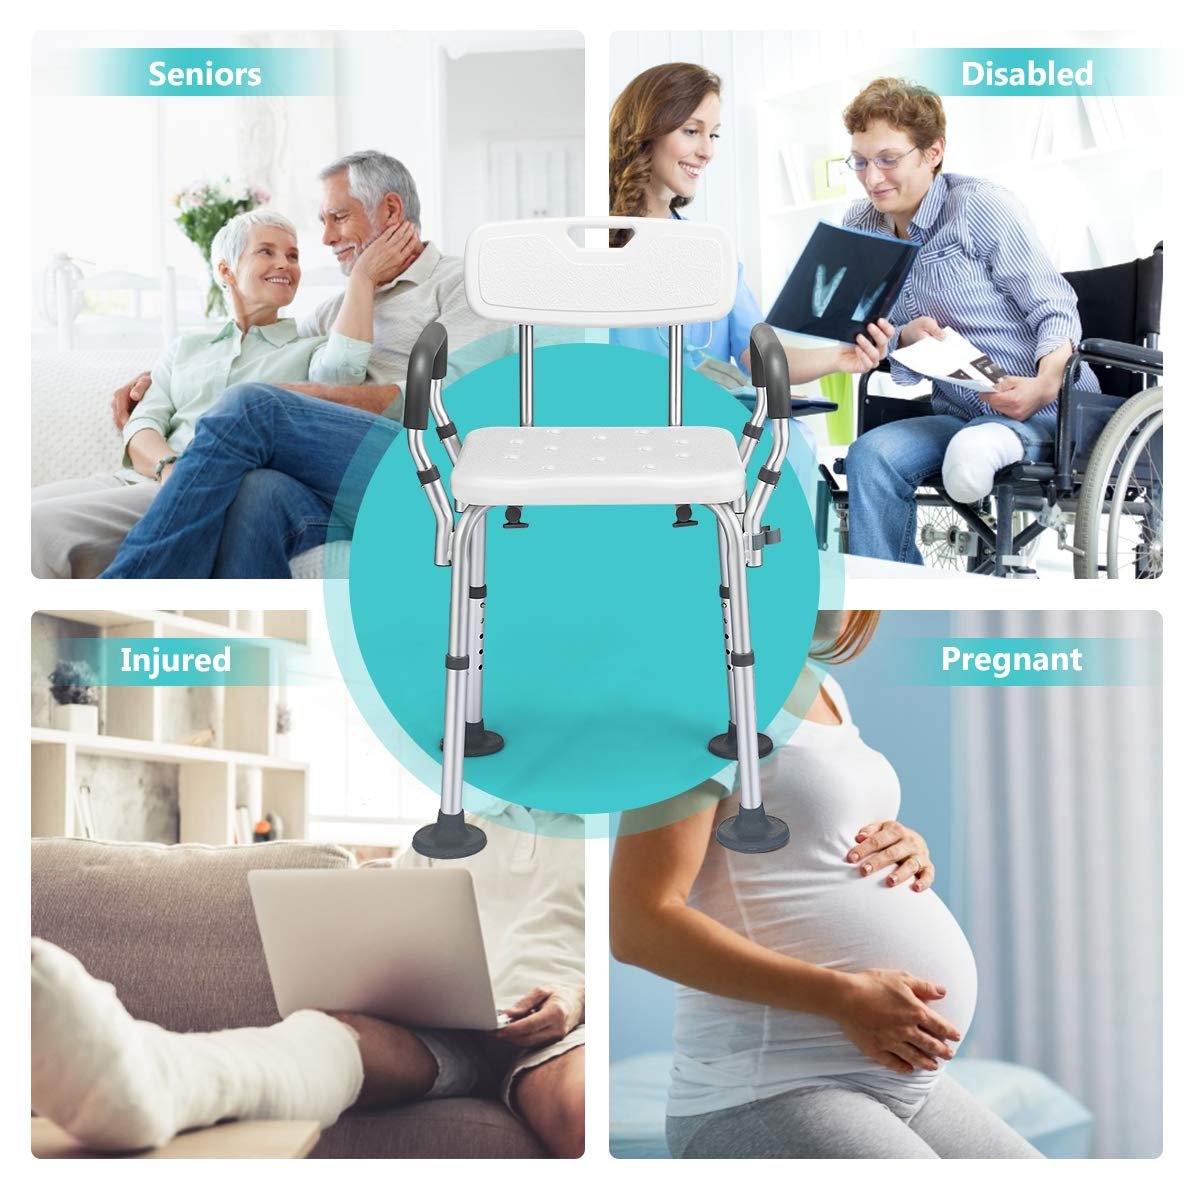 Giantex Shower Chair with Arms and Back Removable (21"x19"x32.5")